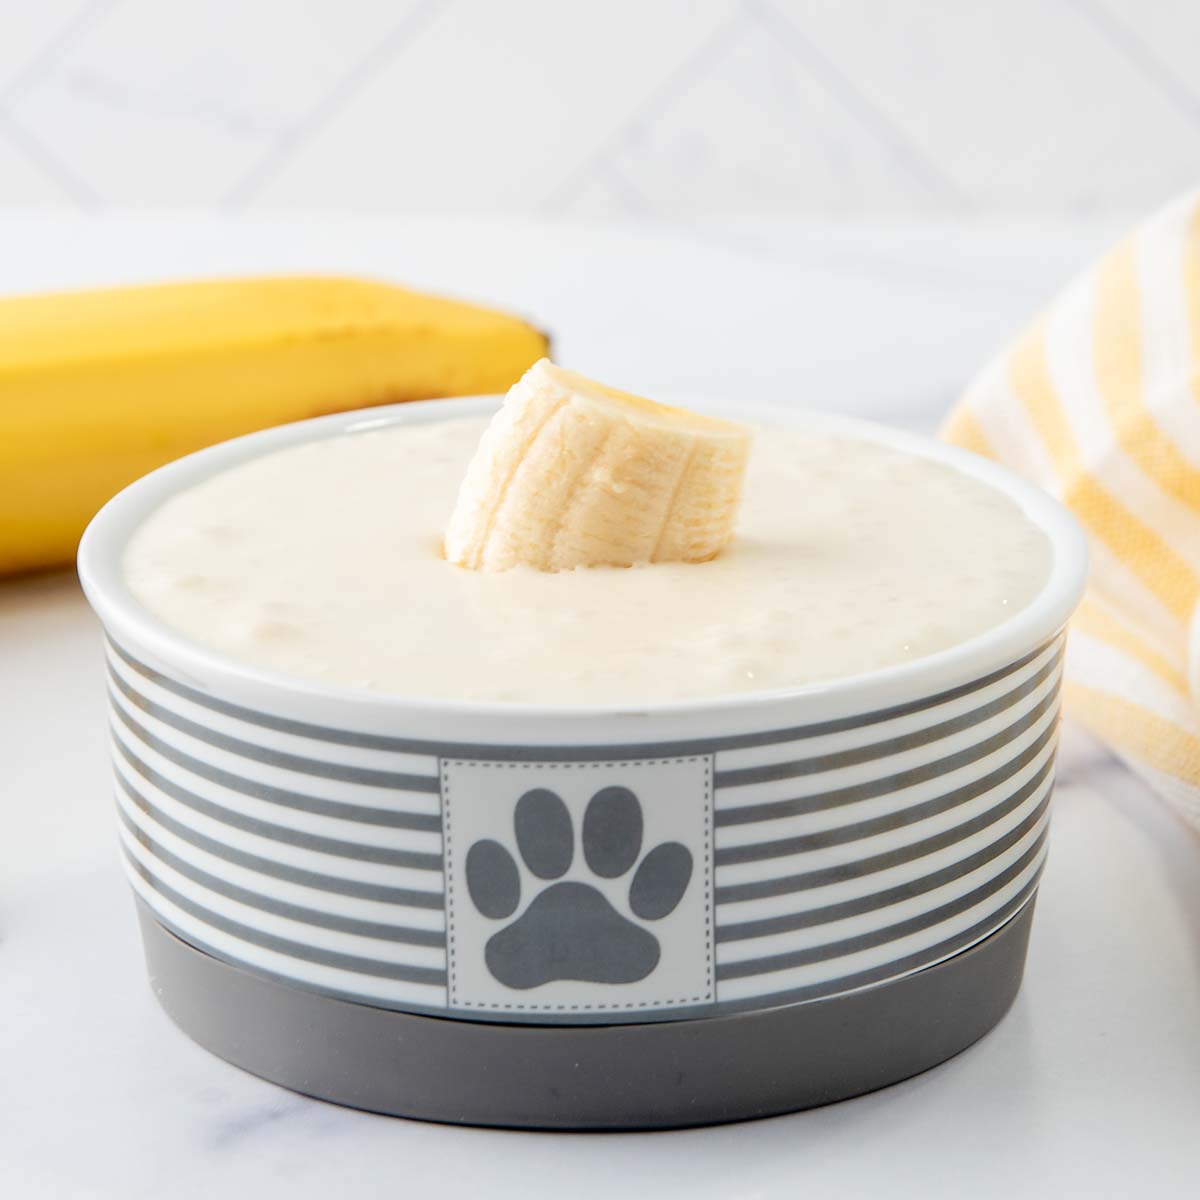 banana dog smoothie in a small dog food bowl.